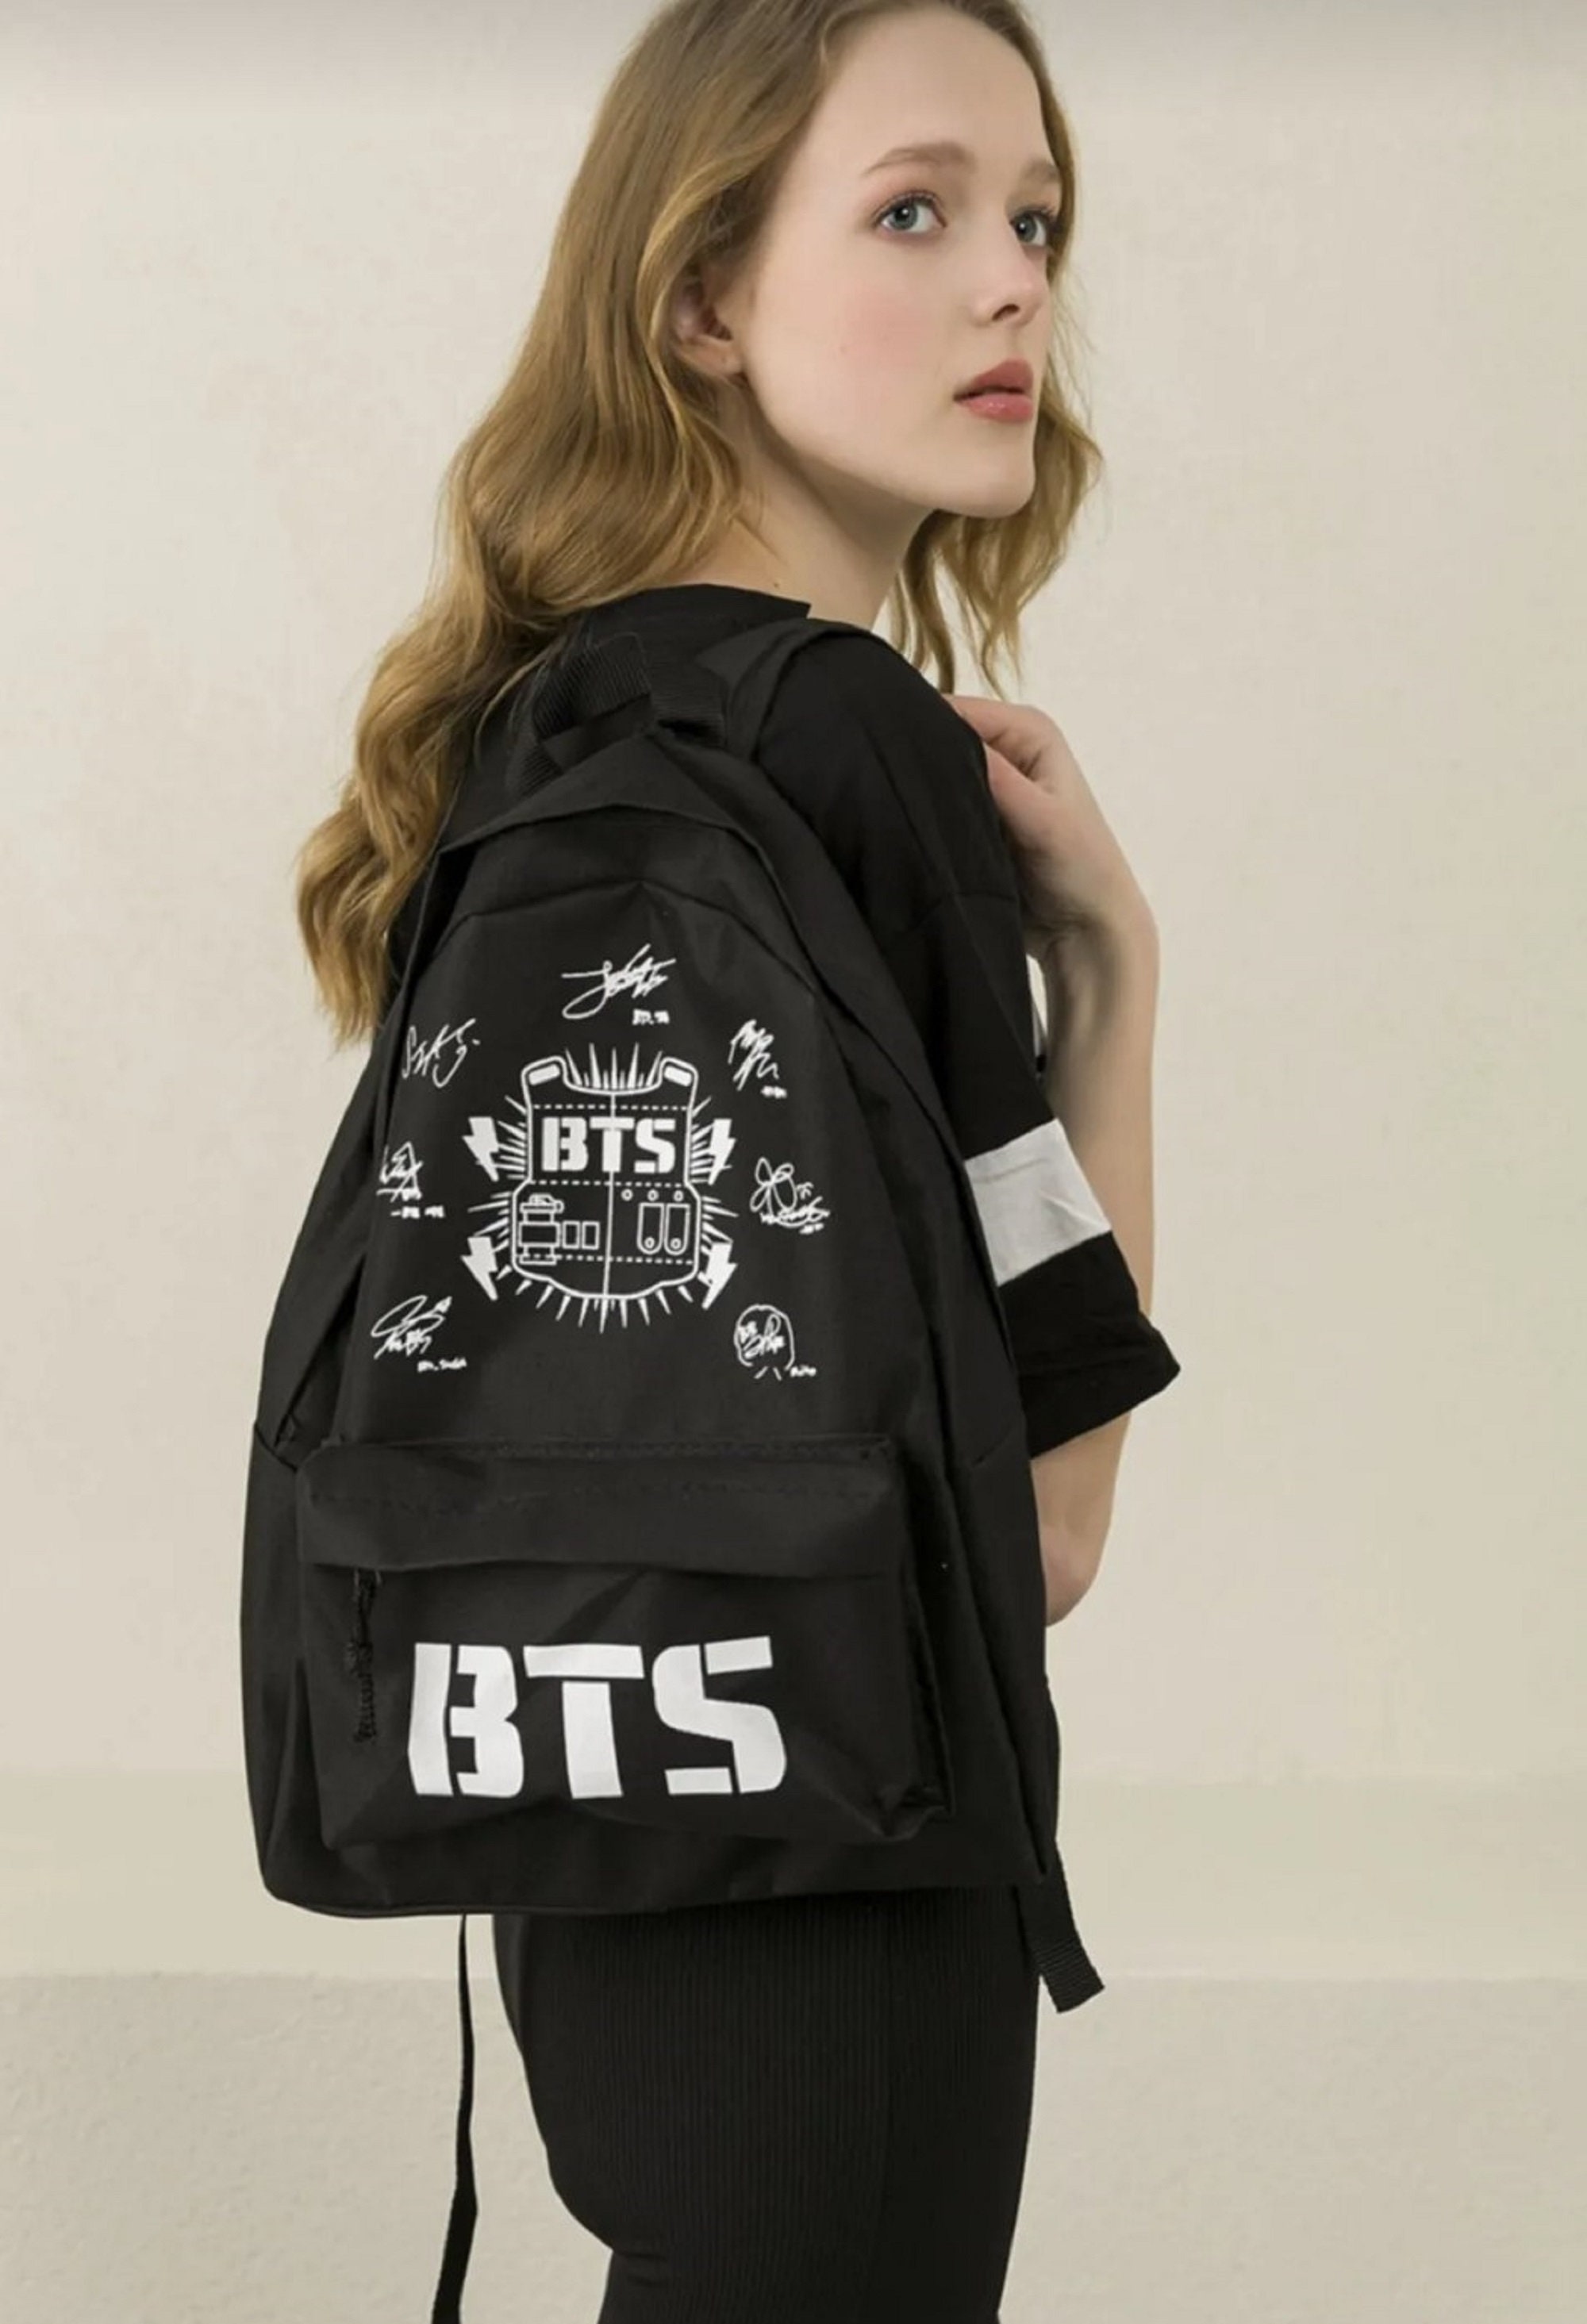 BTS Army Backpack  BTS College Bag –  Online Customized